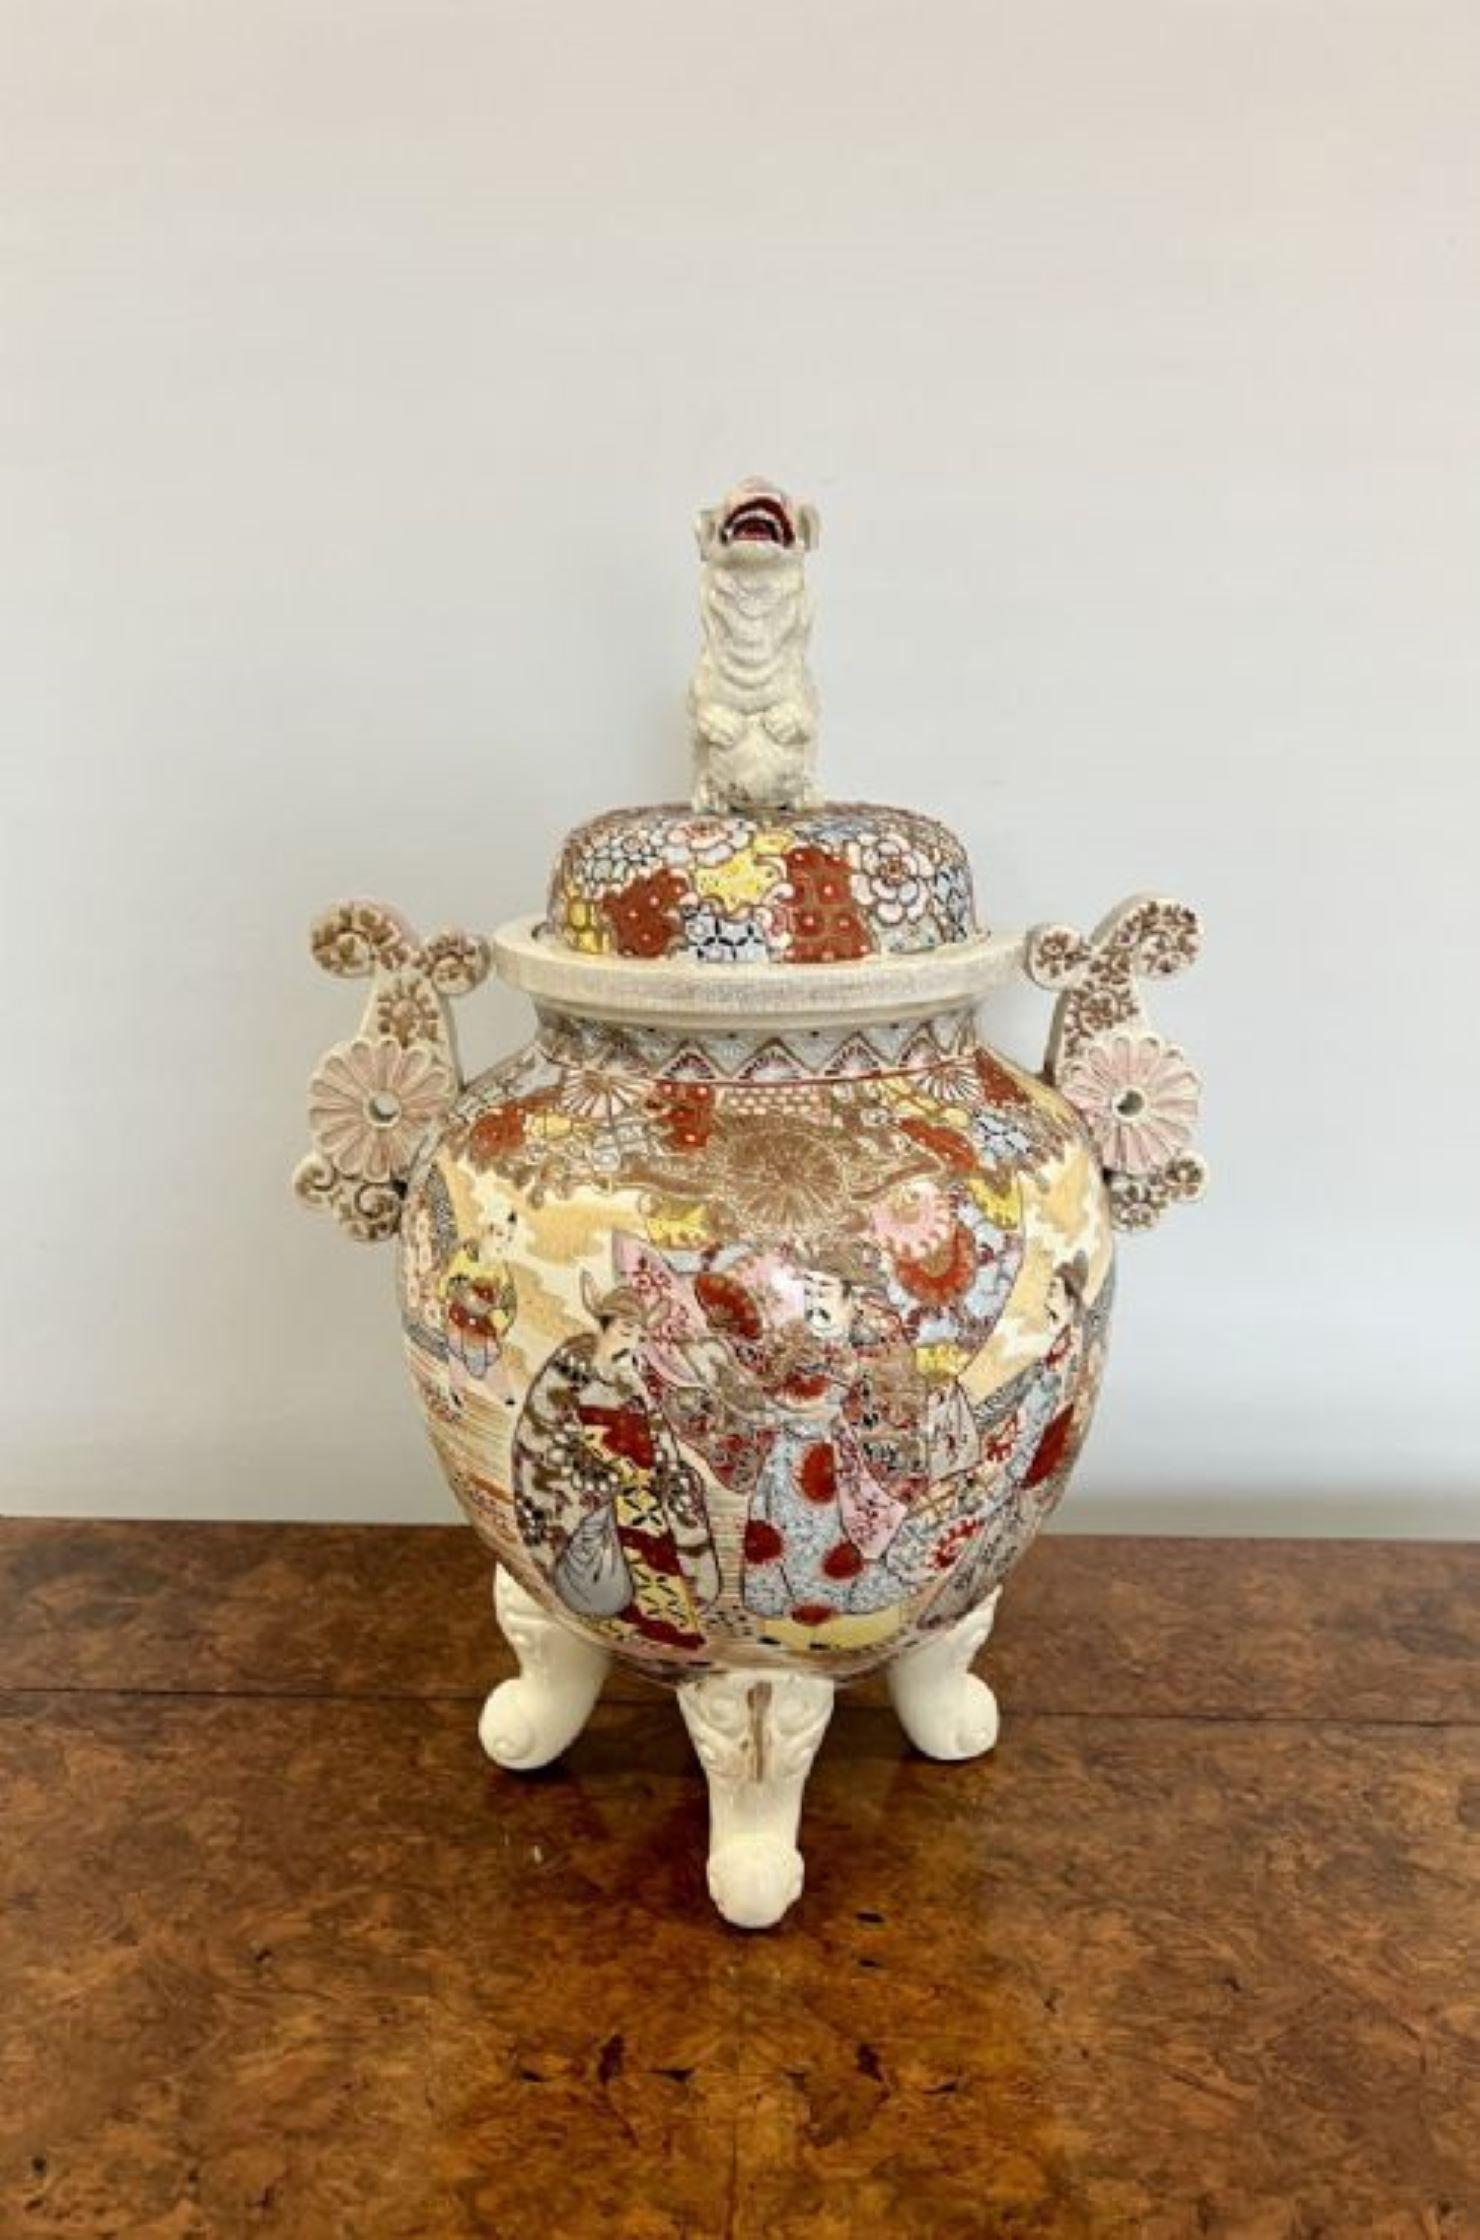 Large antique Japanese quality Satsuma lidded vase having a quality antique Japanese satsuma lidded vase with a dog sitting on the original lid above a circular wonderful hand painted bulbous vase in red, gold, yellow, pink and blue colours standing